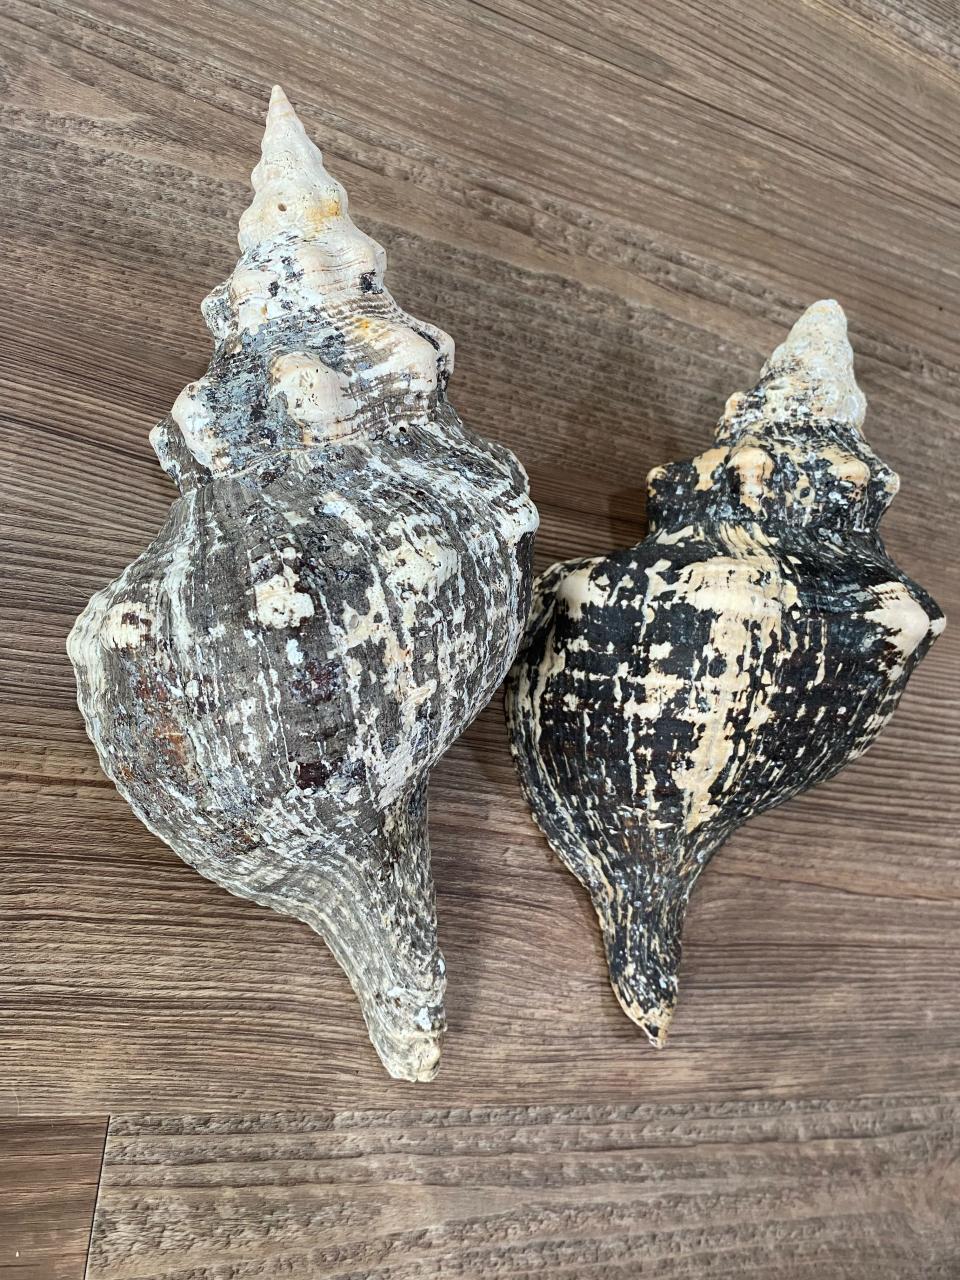 Jessica Reyan and her family were visiting Sanibel Island recently and they uncovered these two large shells.